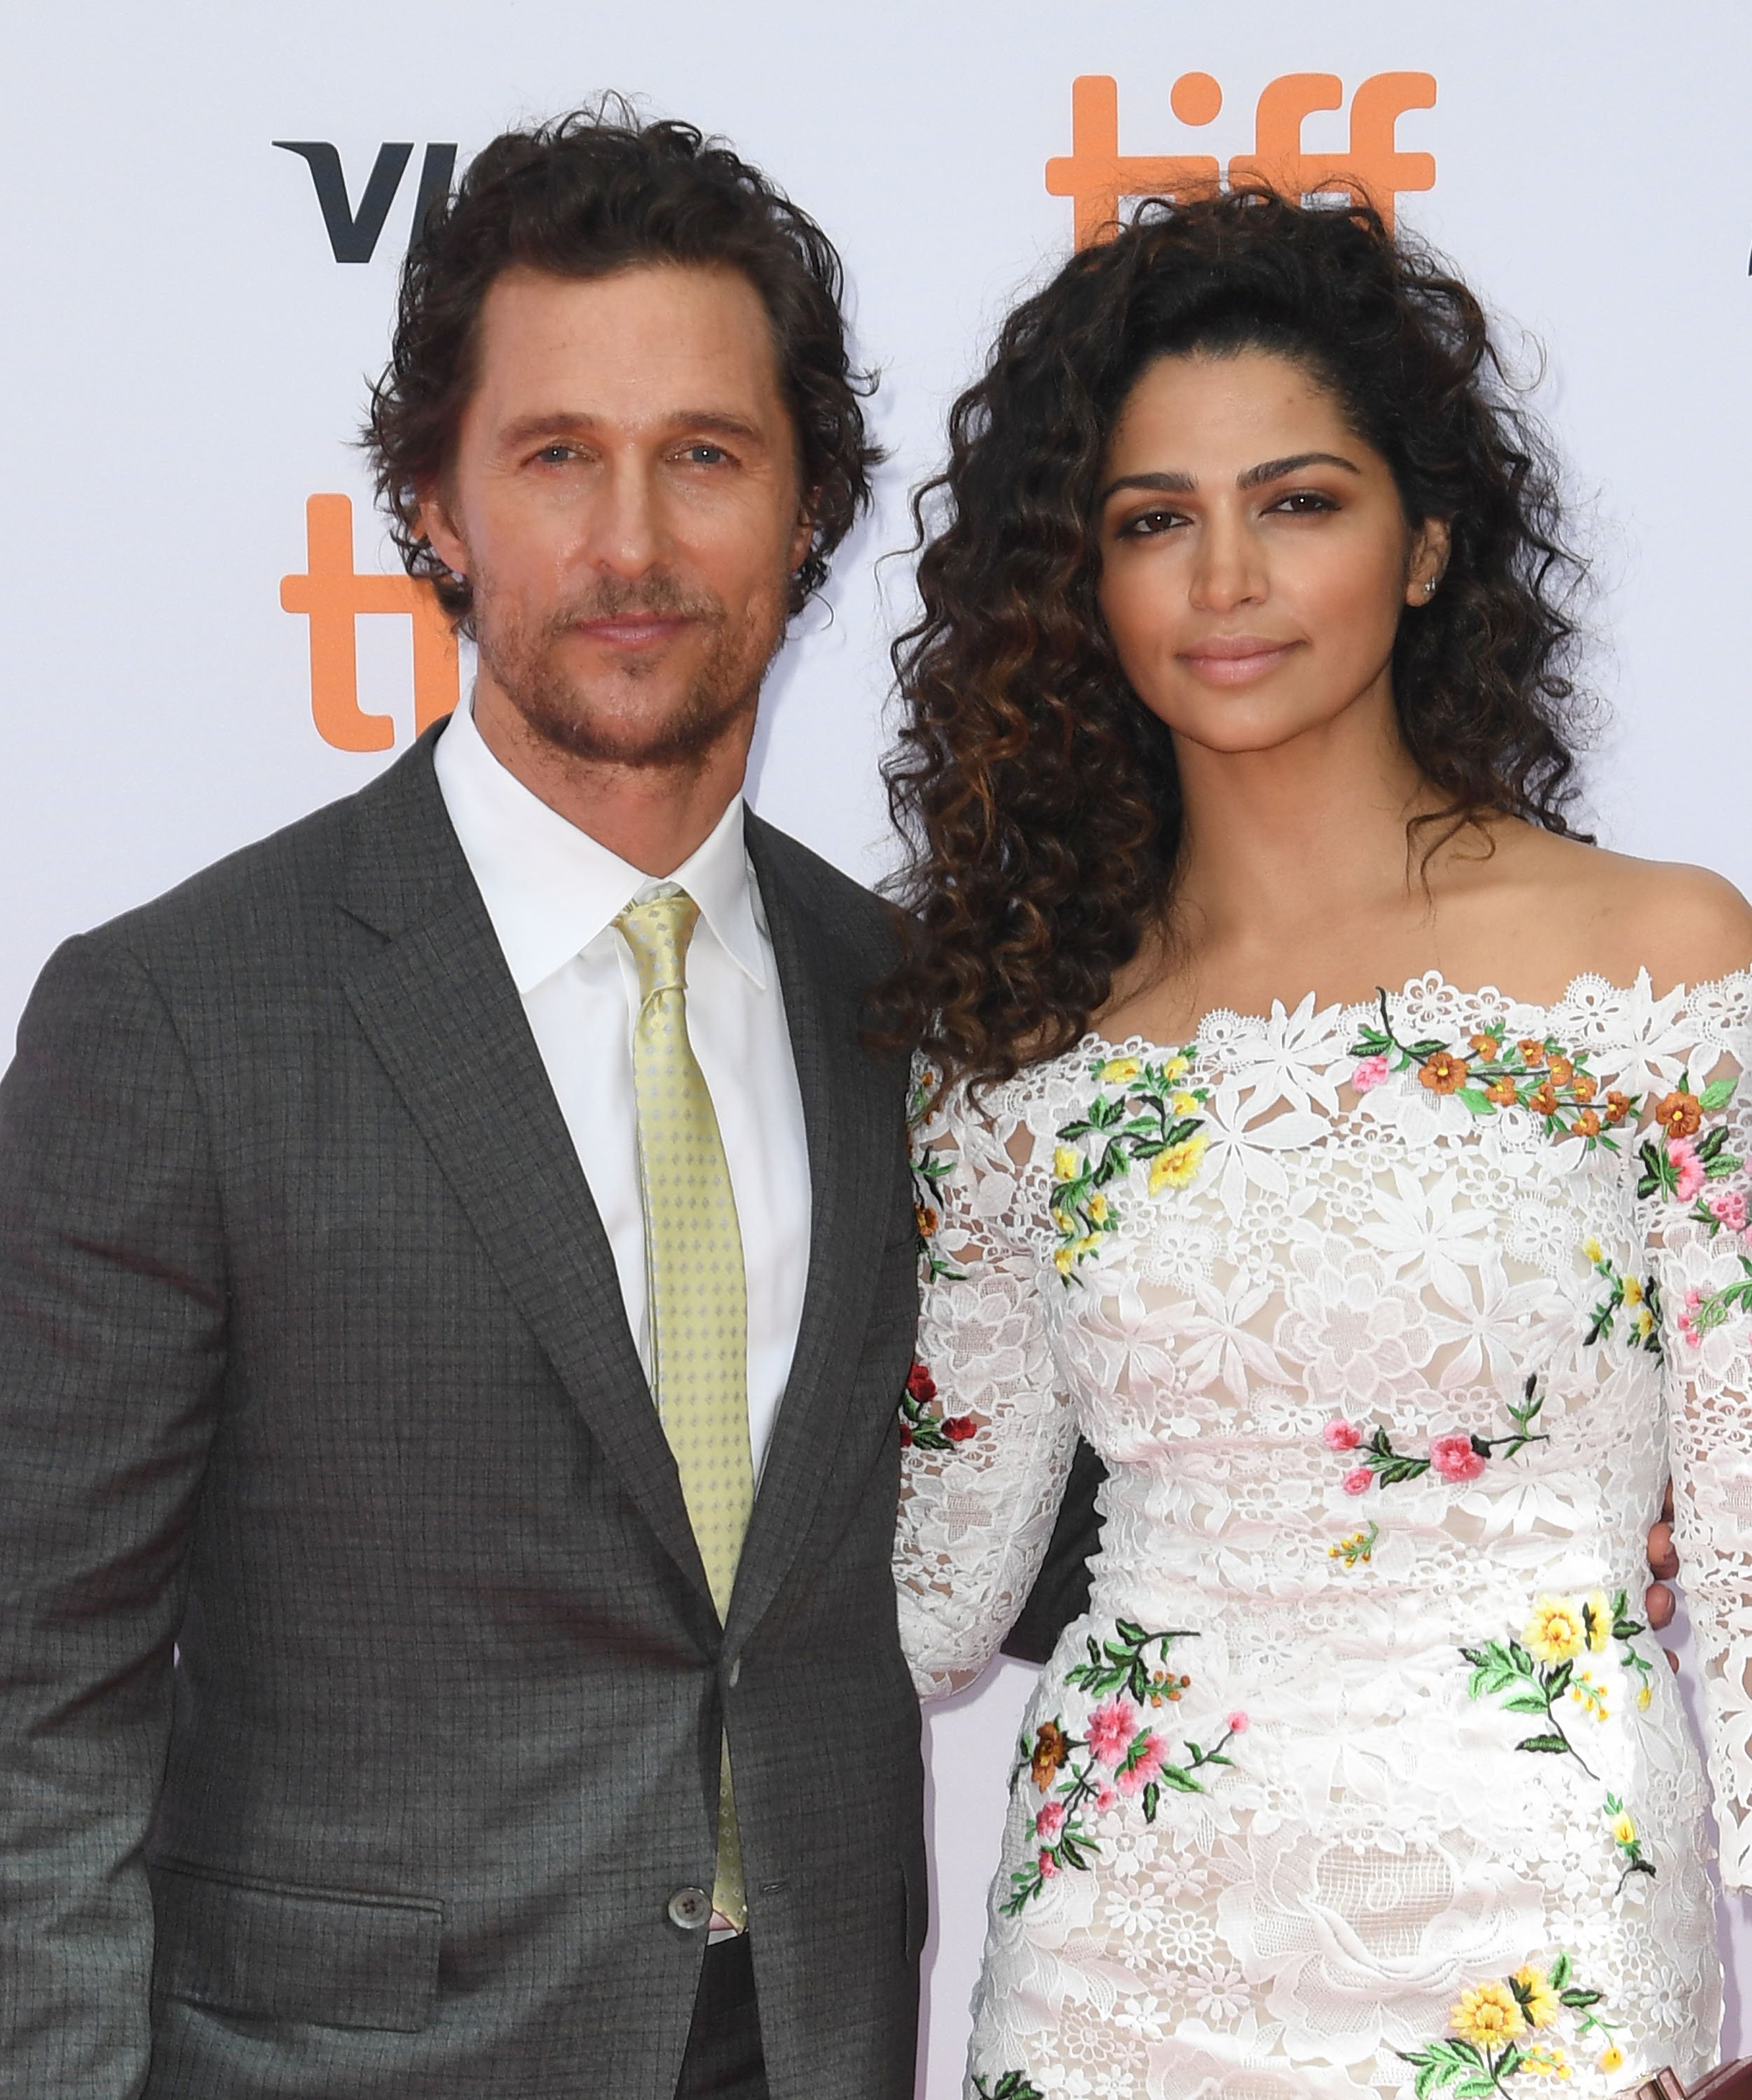 Matthew McConaughey and wife Camila Alves at the "Sing" premiere in Toronto, September, 2016. | Photo: Getty Images. 